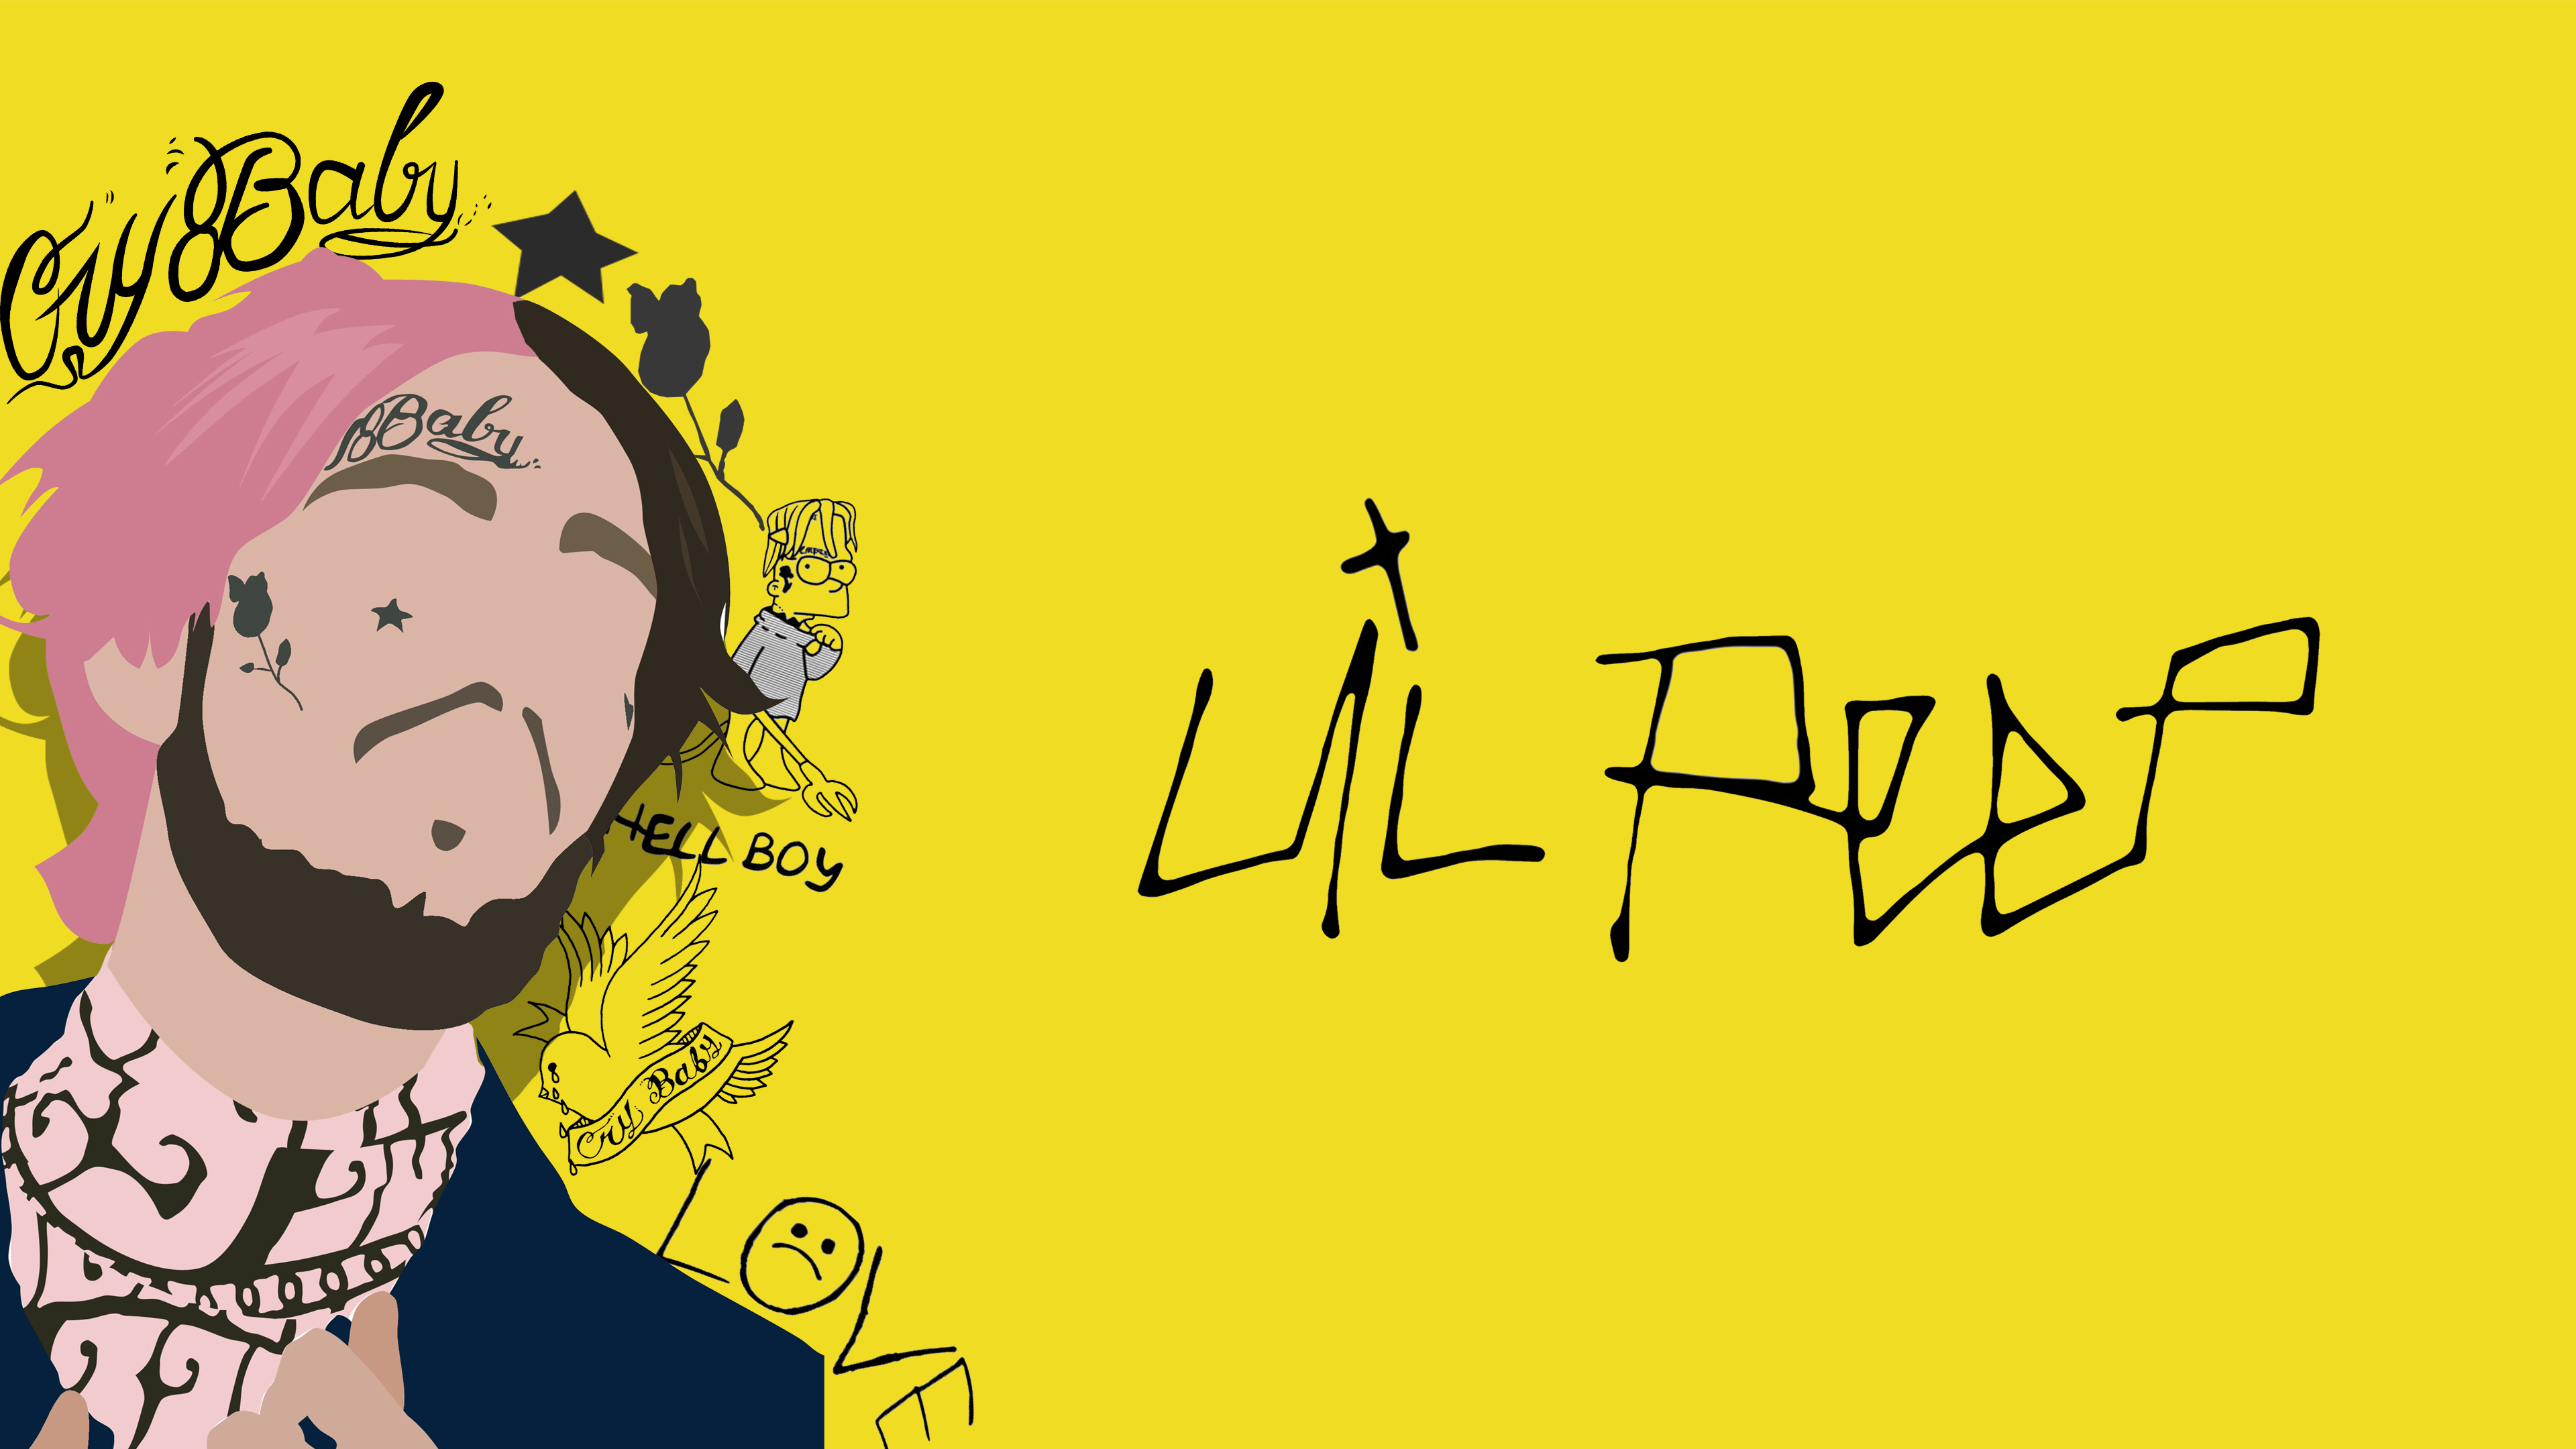 I Compiled A Lil Peep Wallpaper [4K]